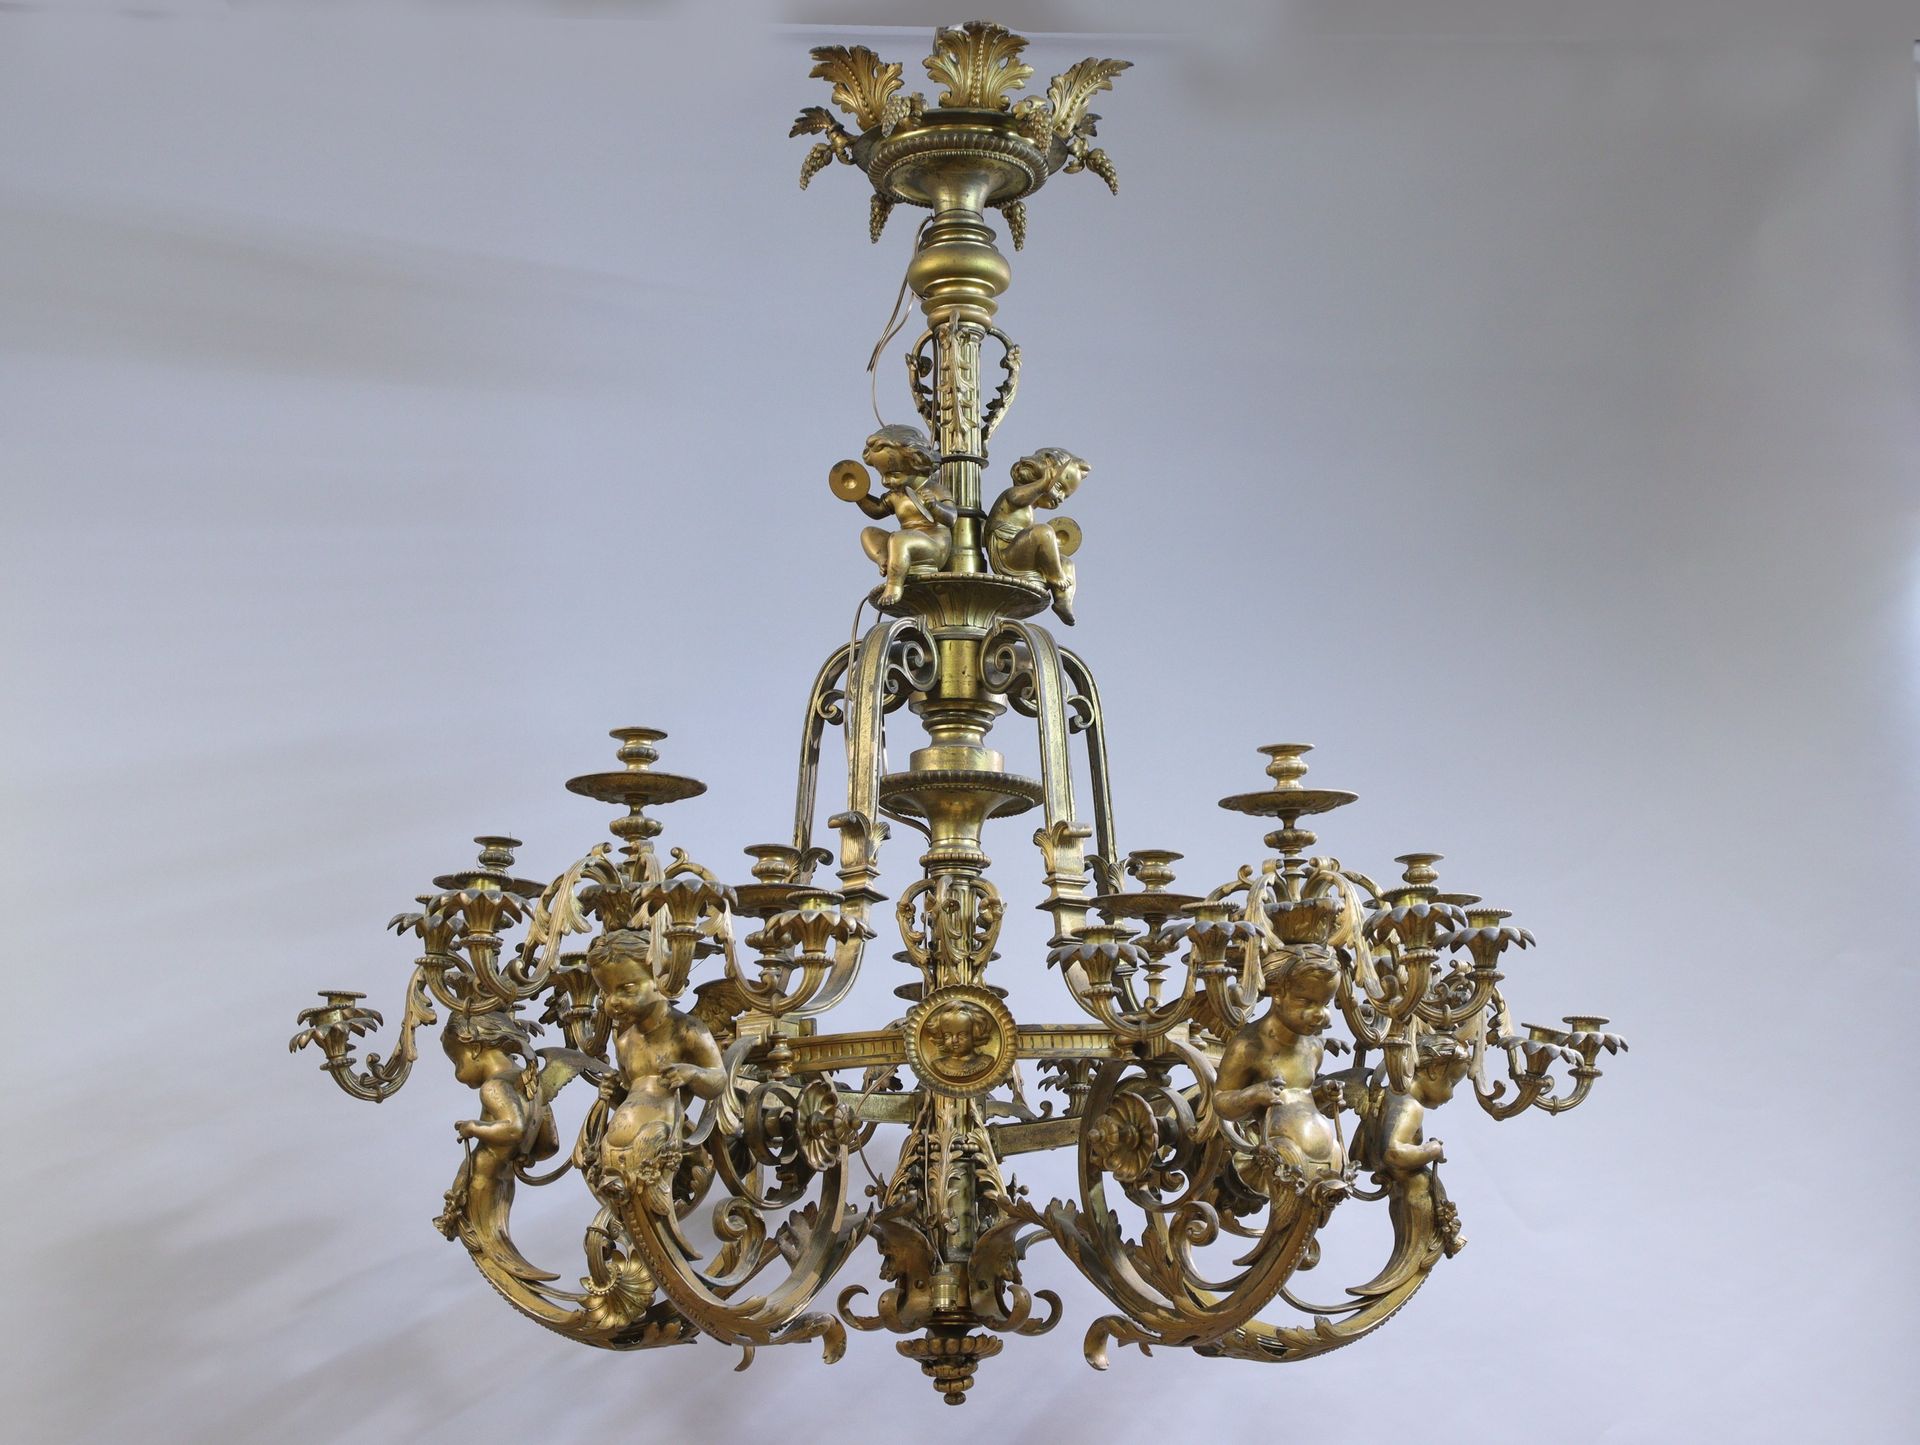 Null attributed to the Marquis house 
Exceptional chandelier with cymbals player&hellip;